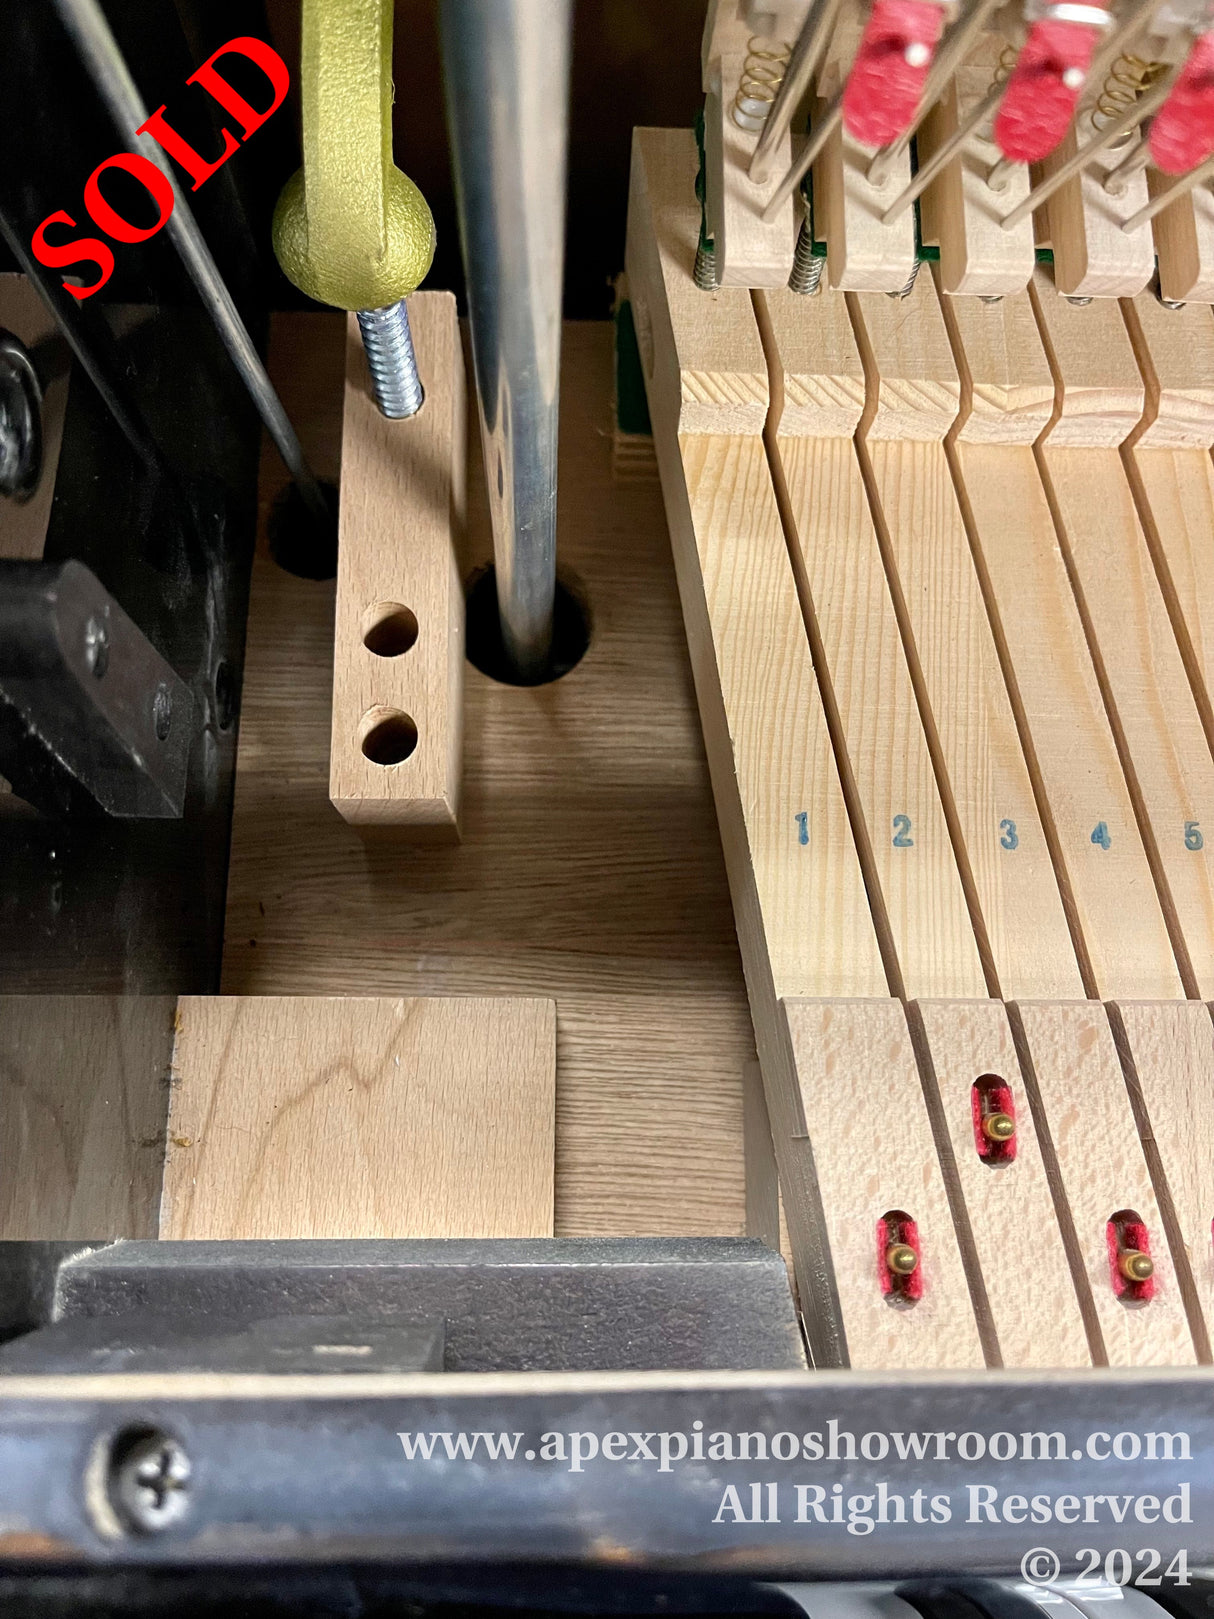 Close-up view of a piano action mechanism, displaying hammers, dampers, and strings typically found inside a grand piano, with a focus on the intricate parts and felts that contribute to the instruments tonal quality.